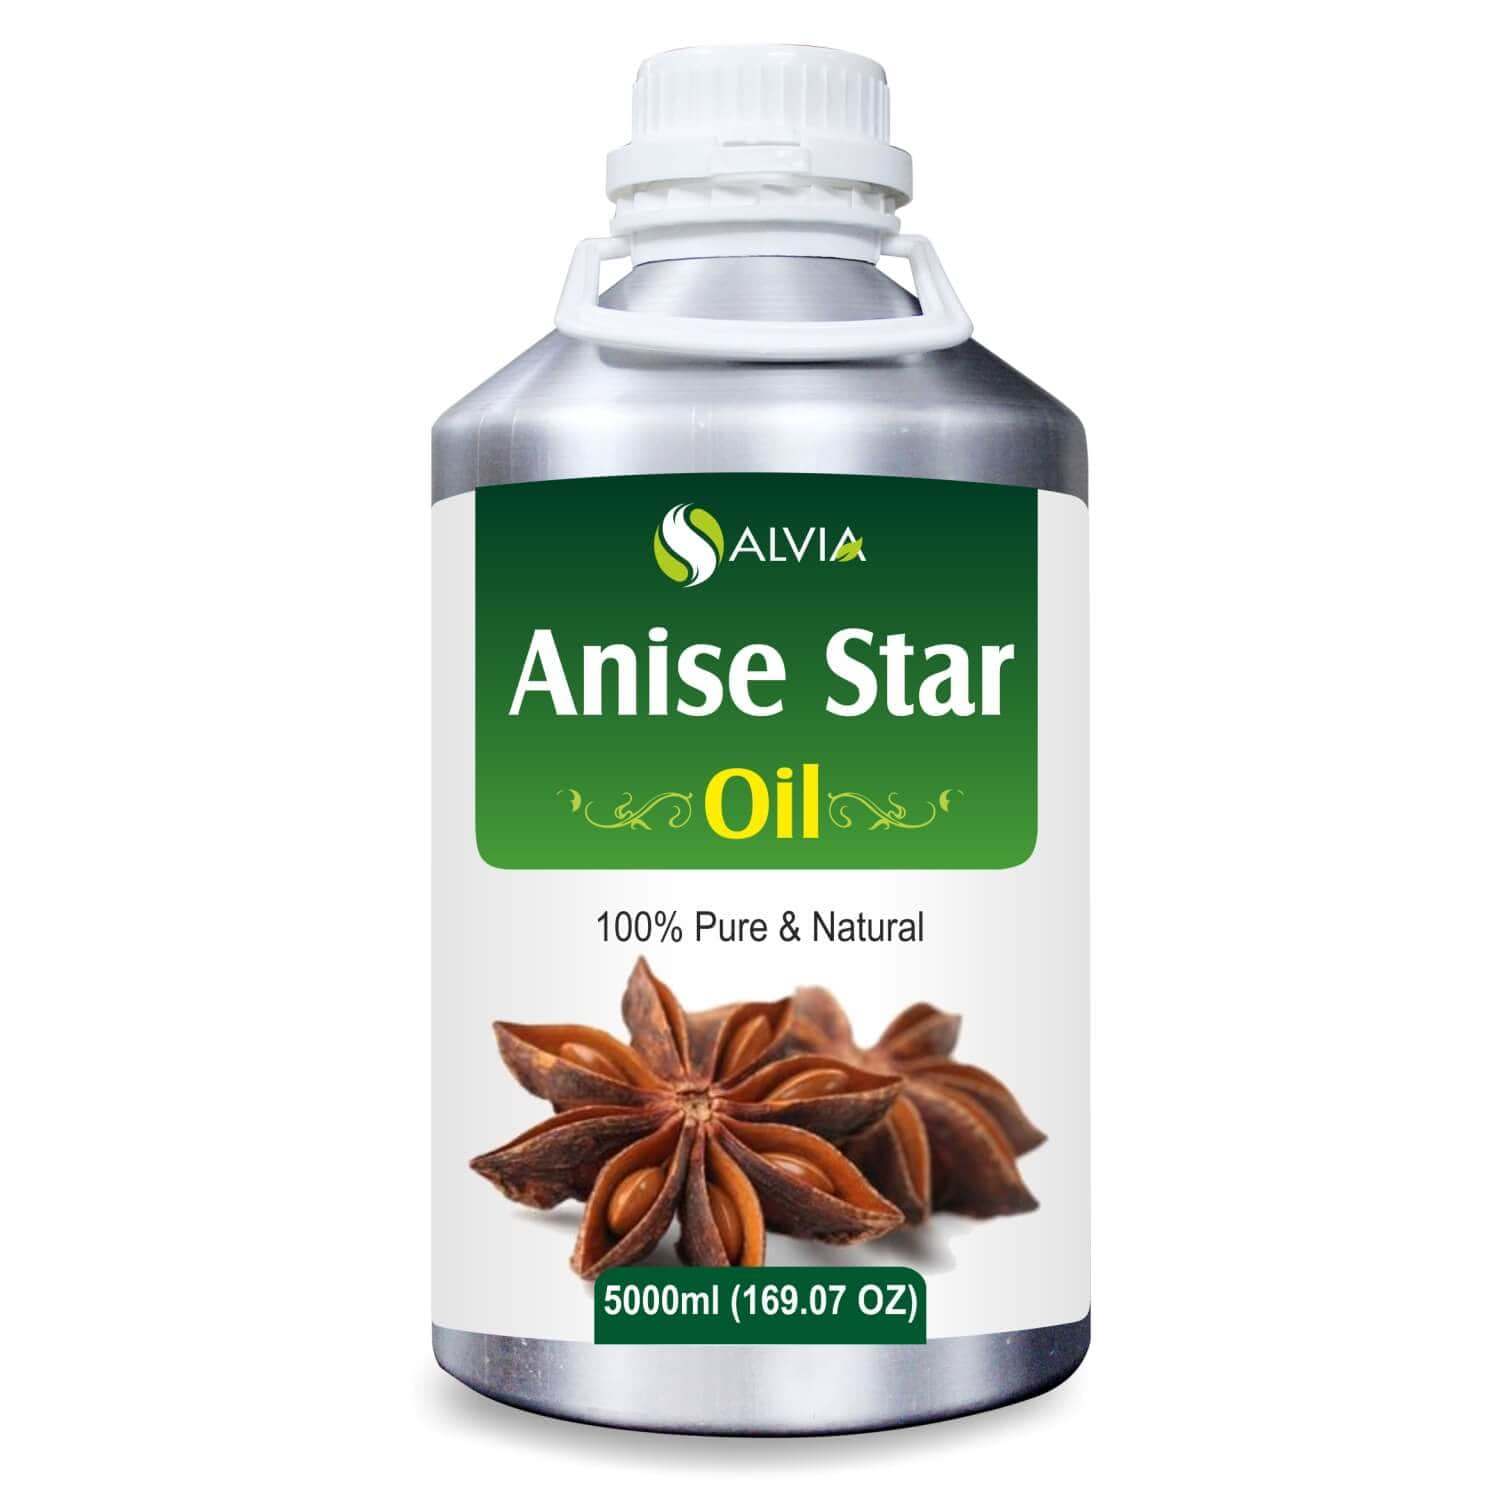 Salvia Natural Essential Oils 5000ml Anise Star Essential Oil, 100% Pure Undiluted & Natural, For Aromatherapy, Eases Cough & Cold, Reduces Tension, Diminishes Acne